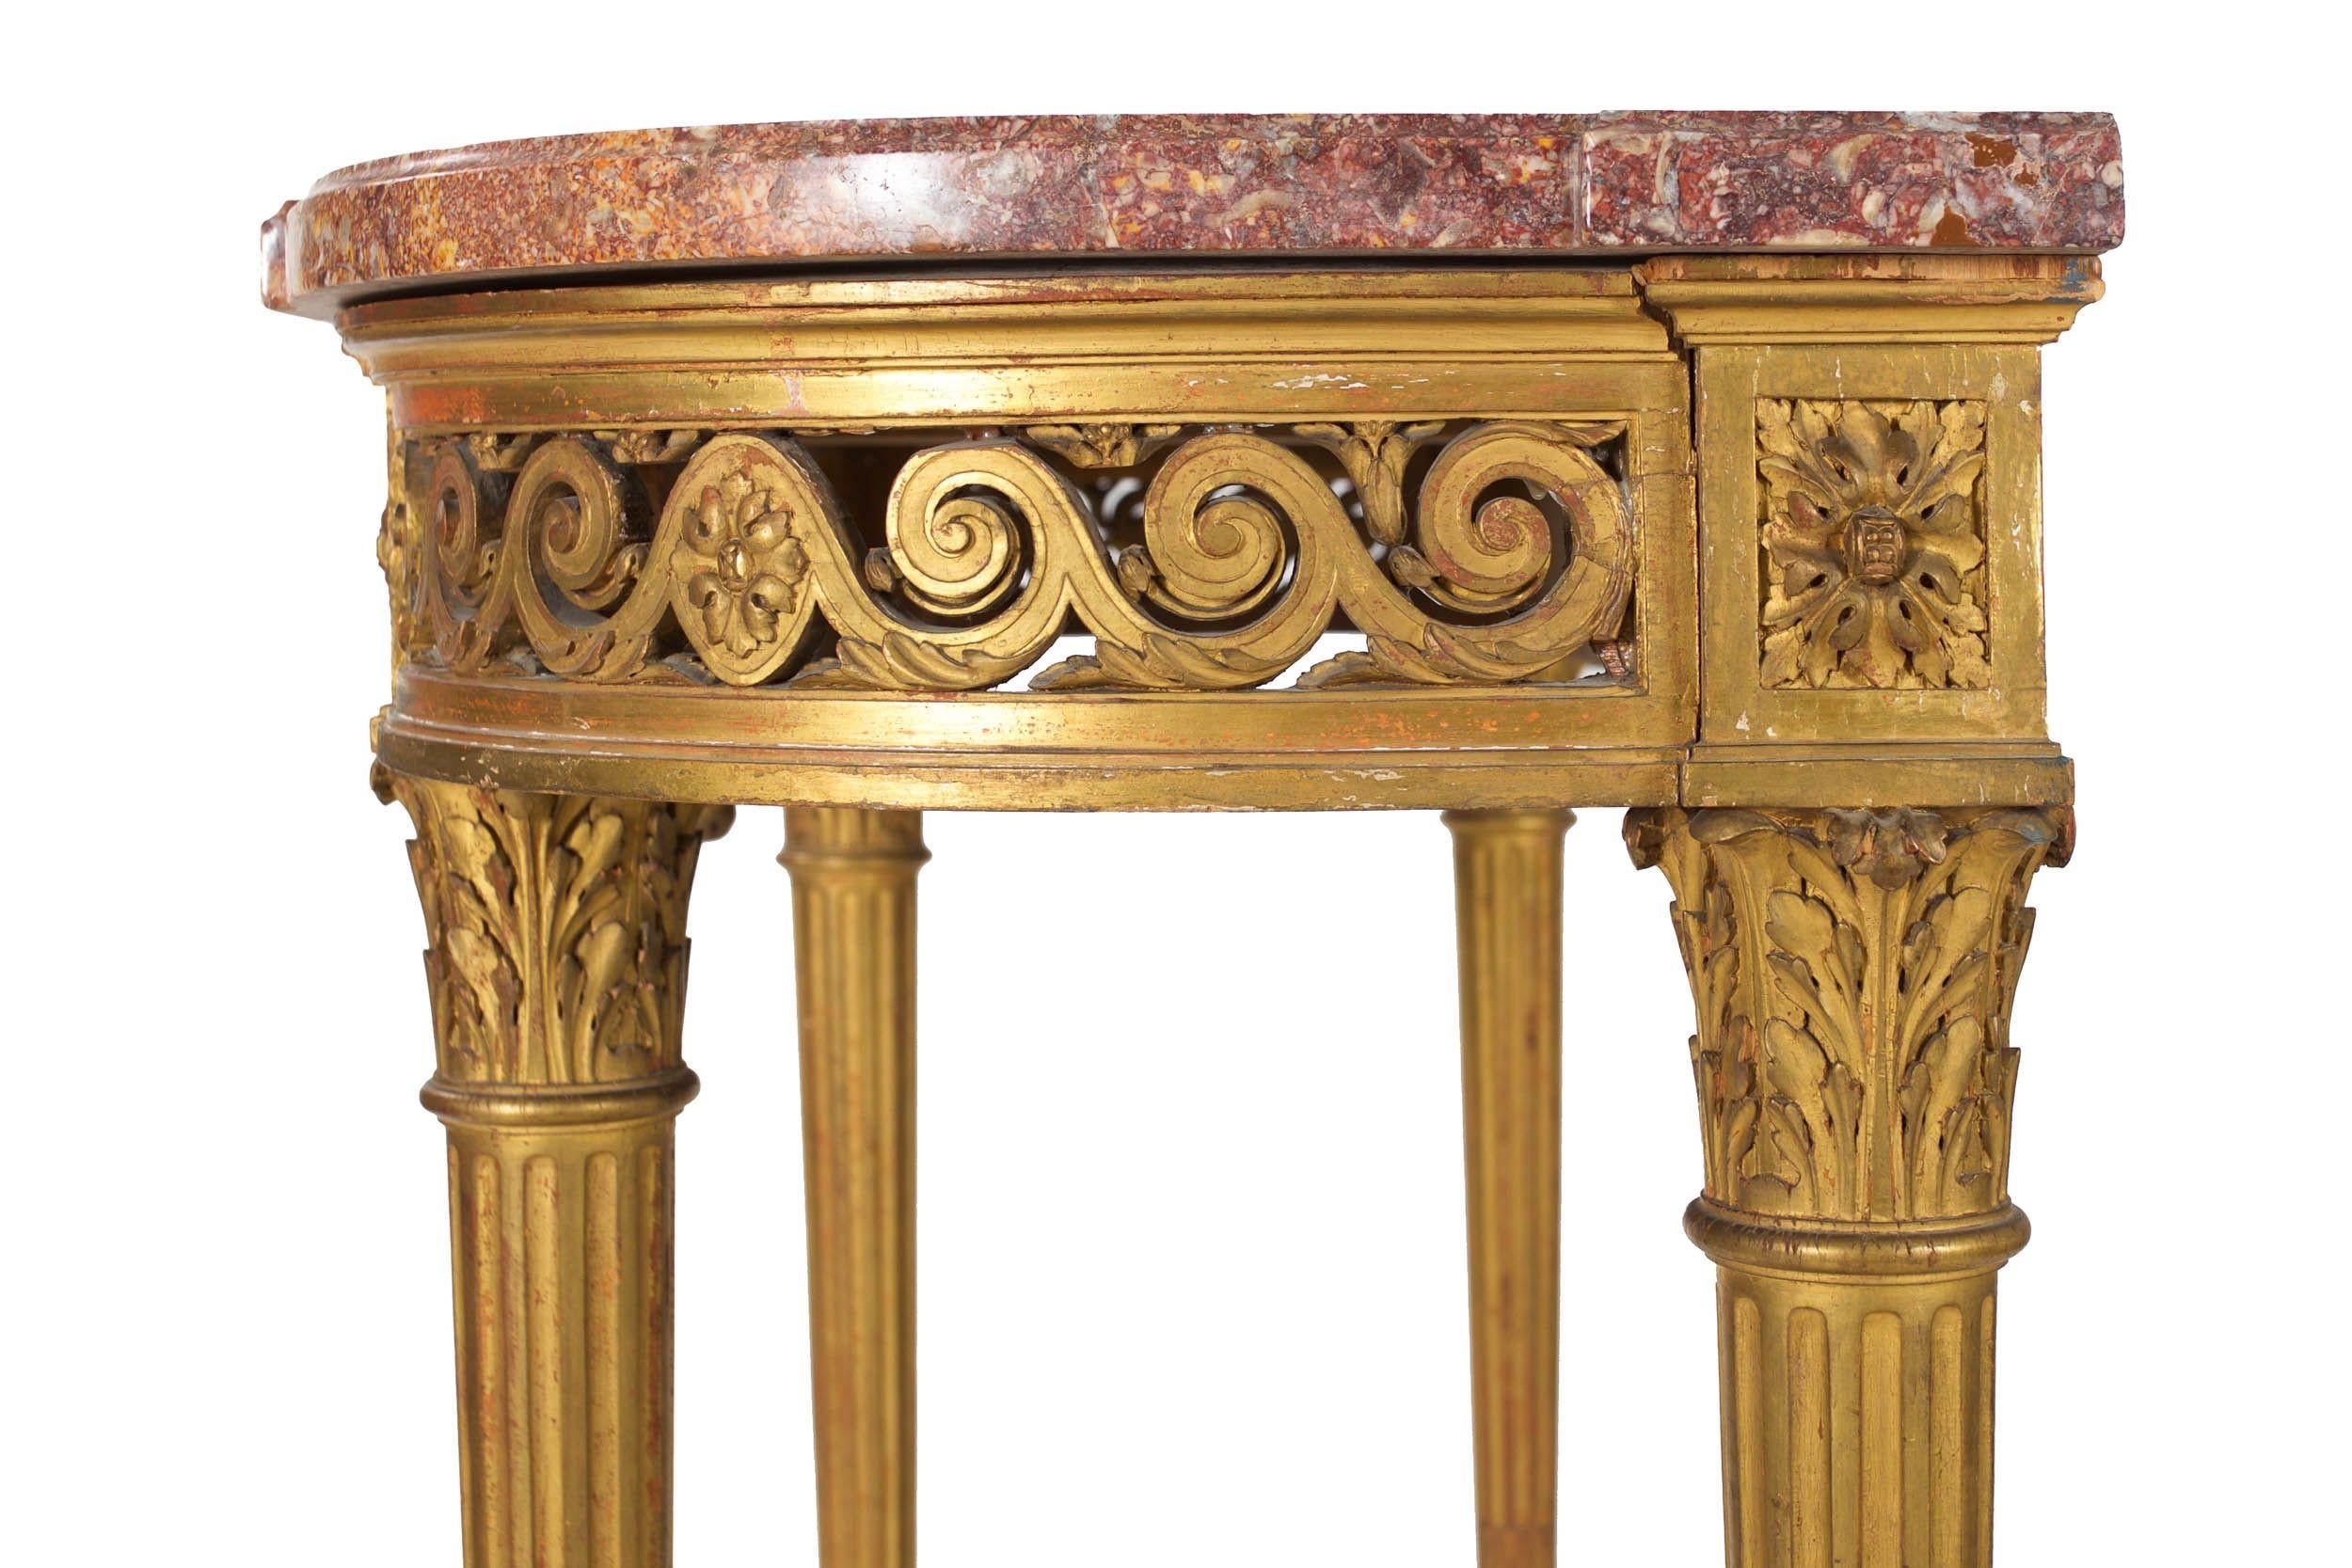 19th Century French Antique Louis XVI Style Giltwood Pier Table Console For Sale 5